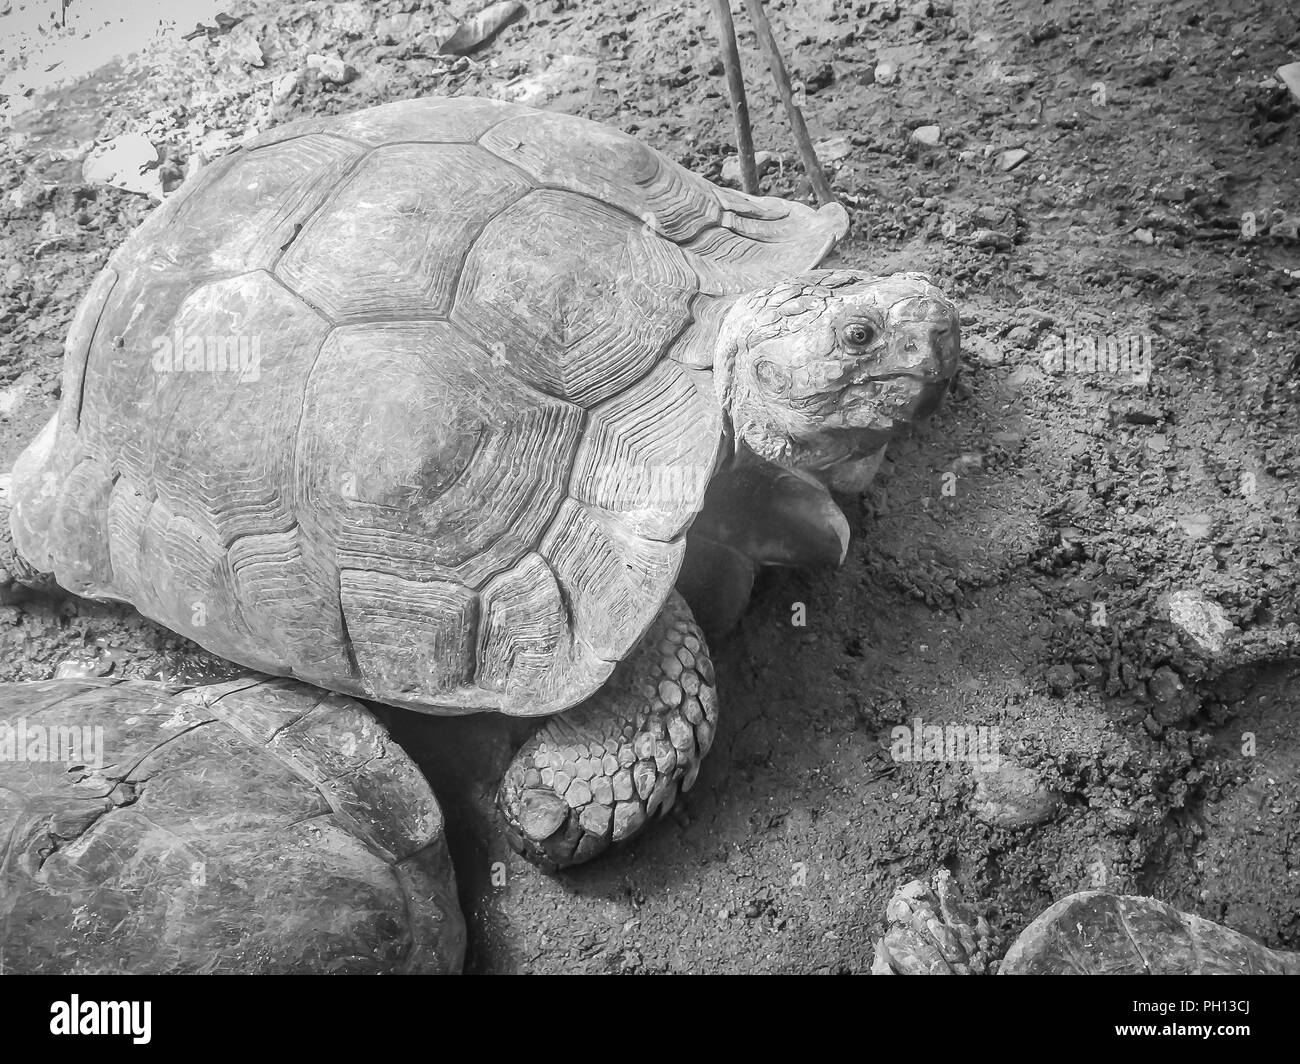 Brown Asian Giant Tortoise at the Public Zoo. Stock Photo